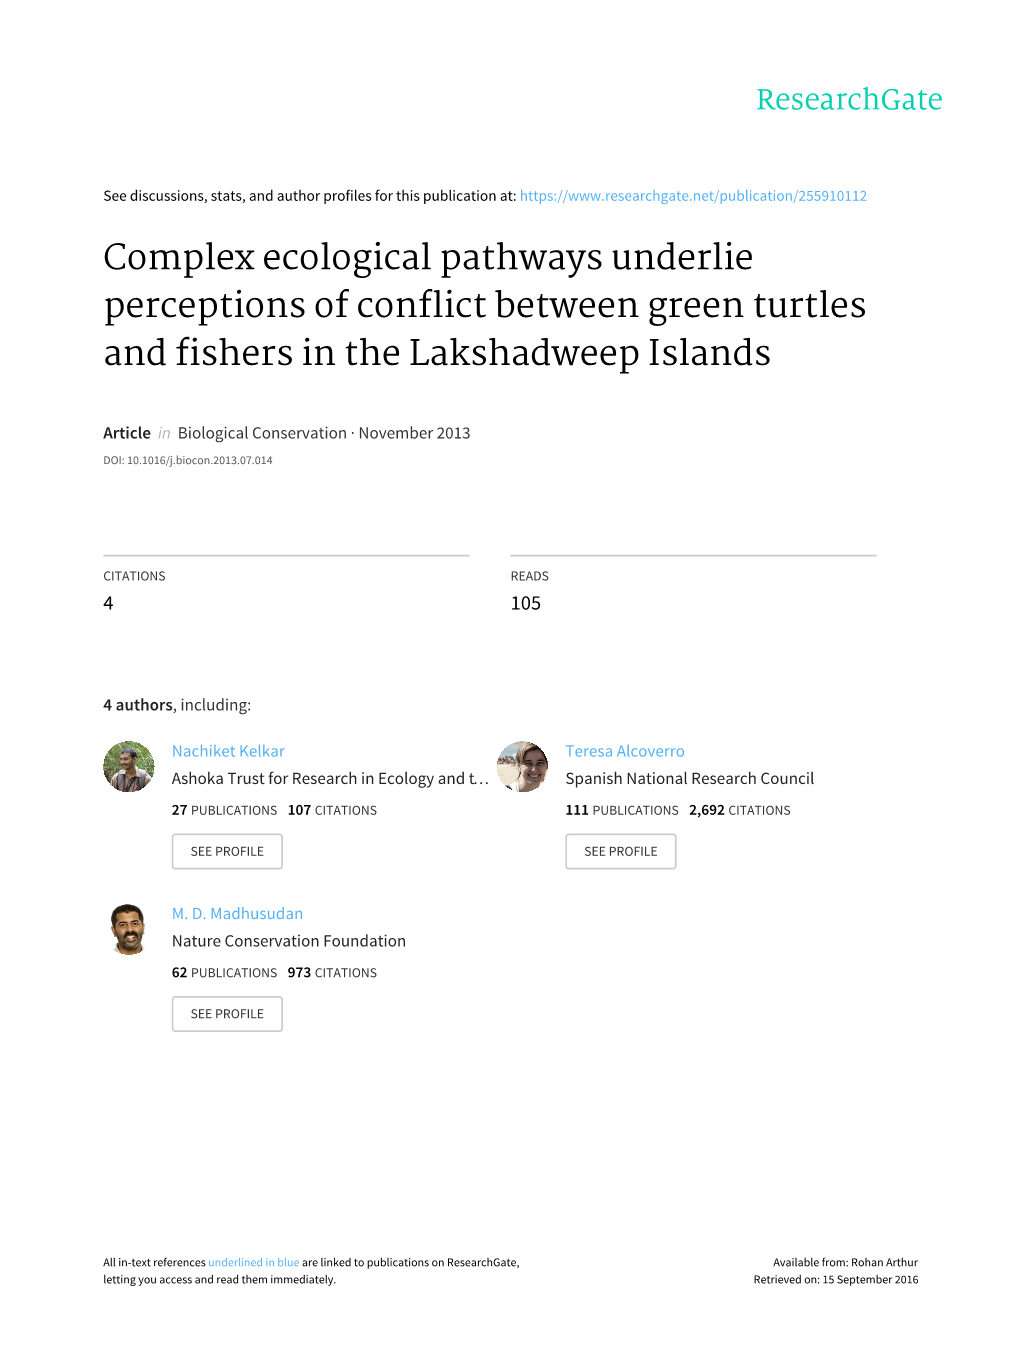 Complex Ecological Pathways Underlie Perceptions of Conflict Between Green Turtles and Fishers in the Lakshadweep Islands